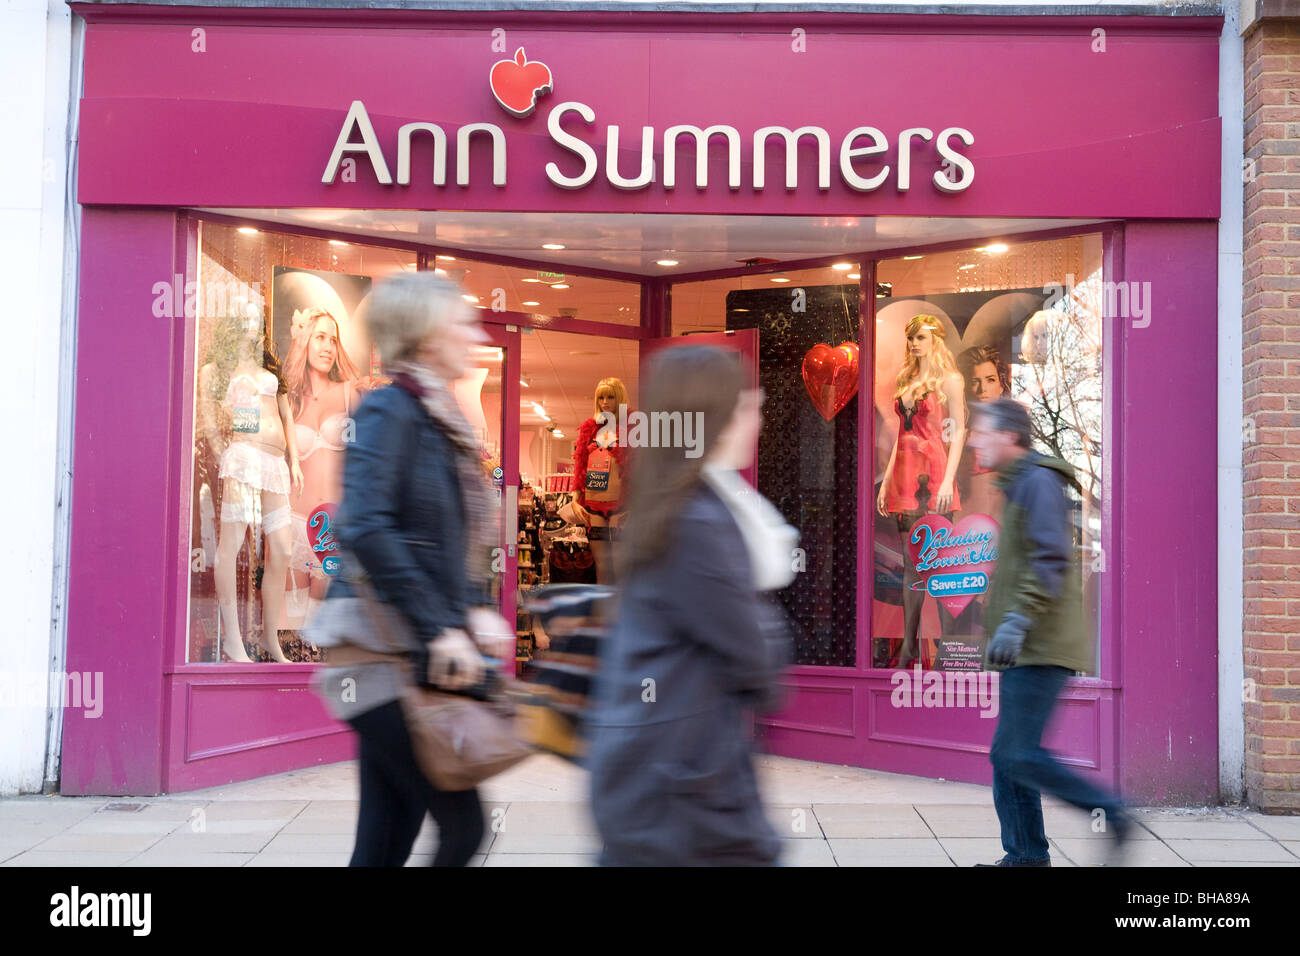 Ann Summers Store Stock Photo